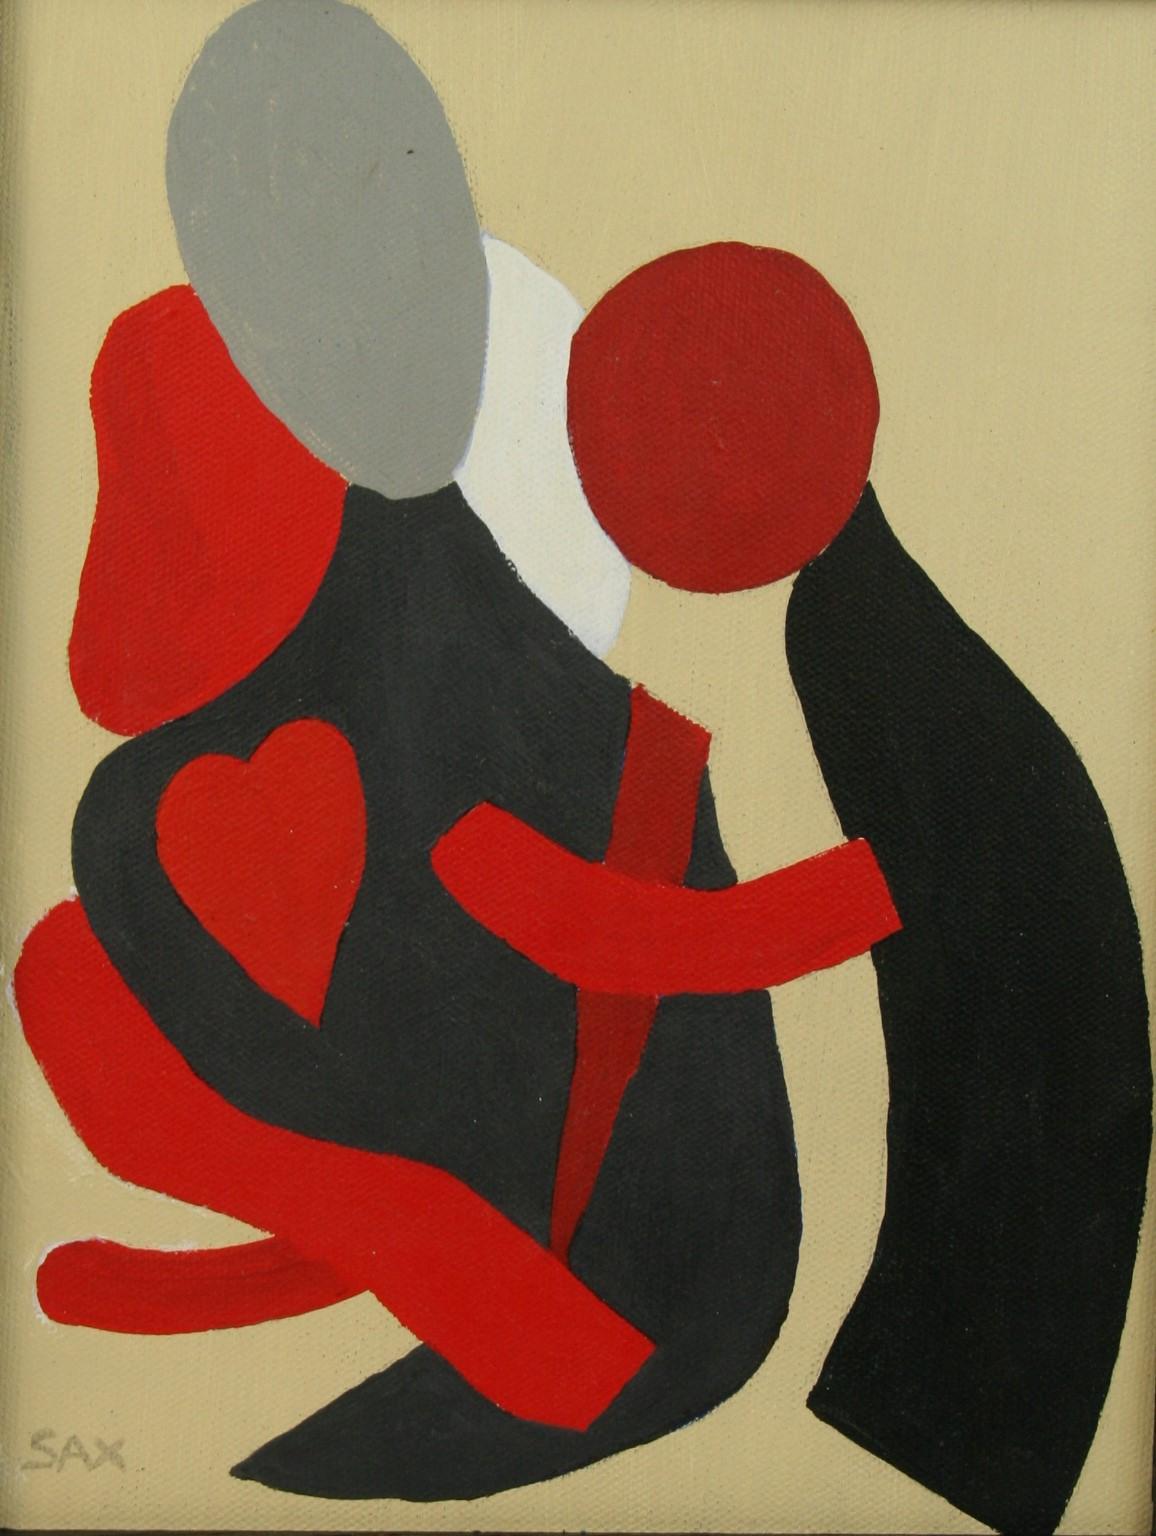 Surreal Abstract Tender Heart Lovers - Painting by Sax